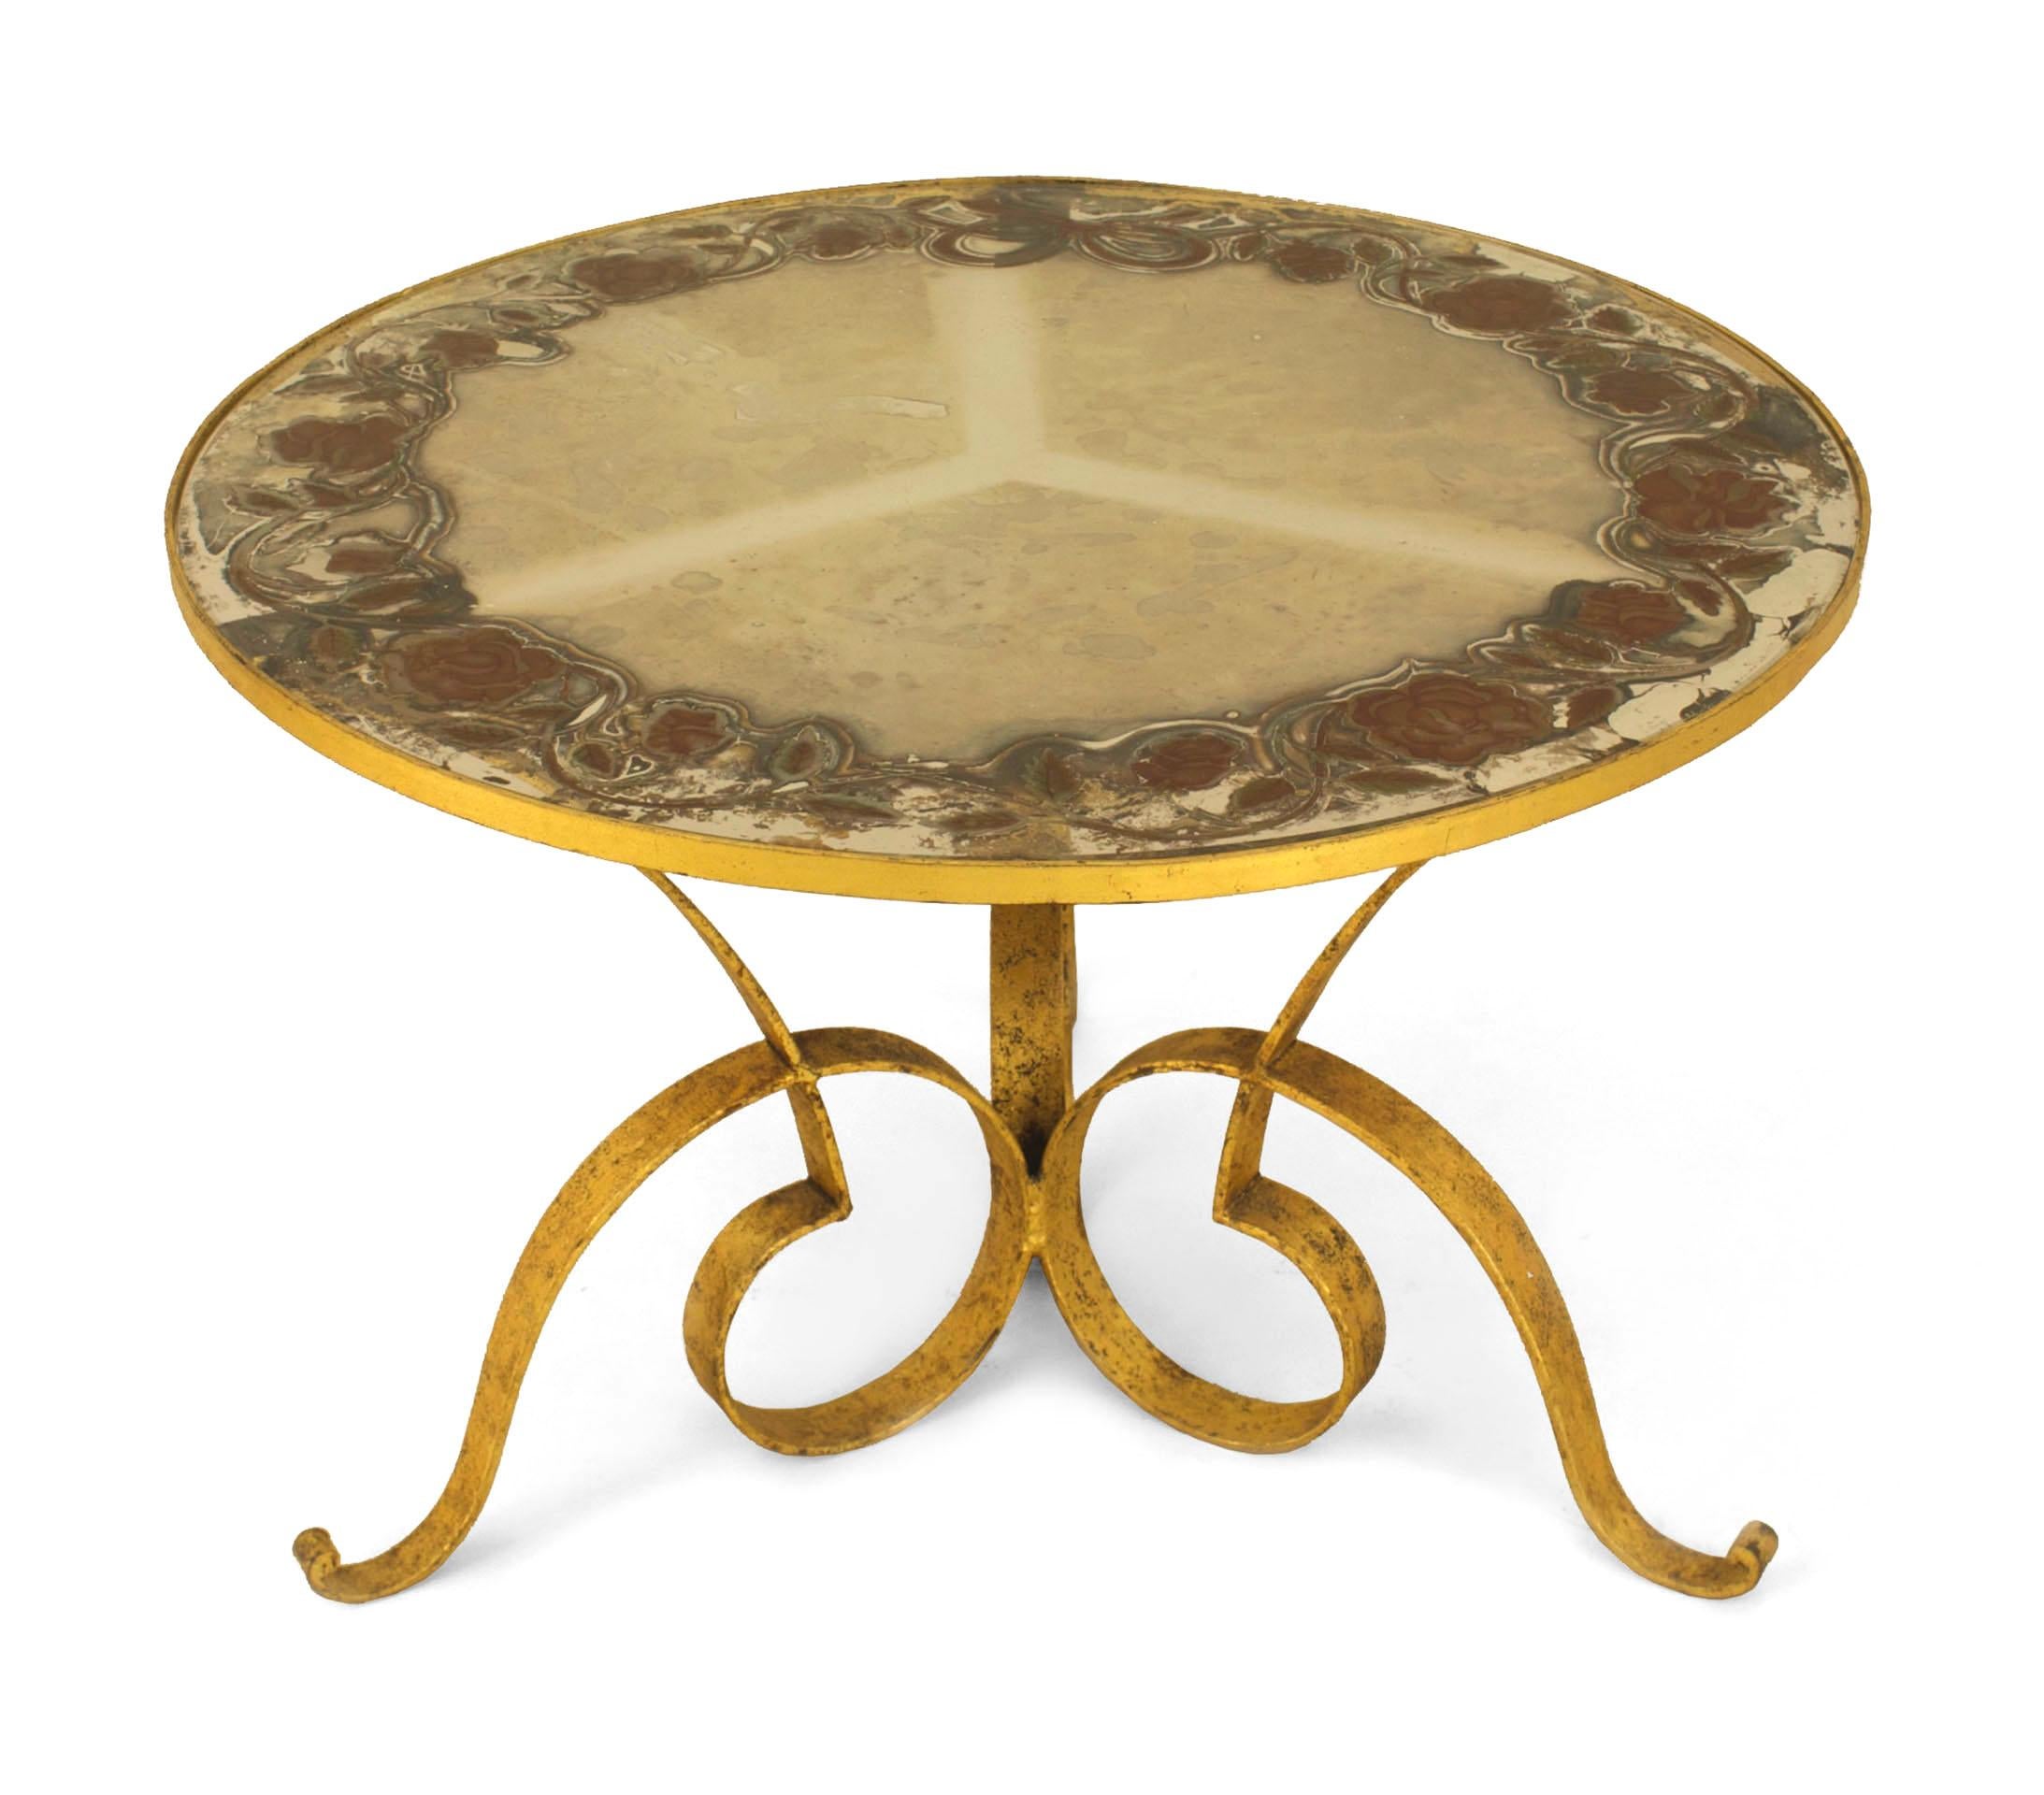 French 1940's gilded hand-hammered iron coffee table with triple scroll design base supporting a circular black opaque glass top.
